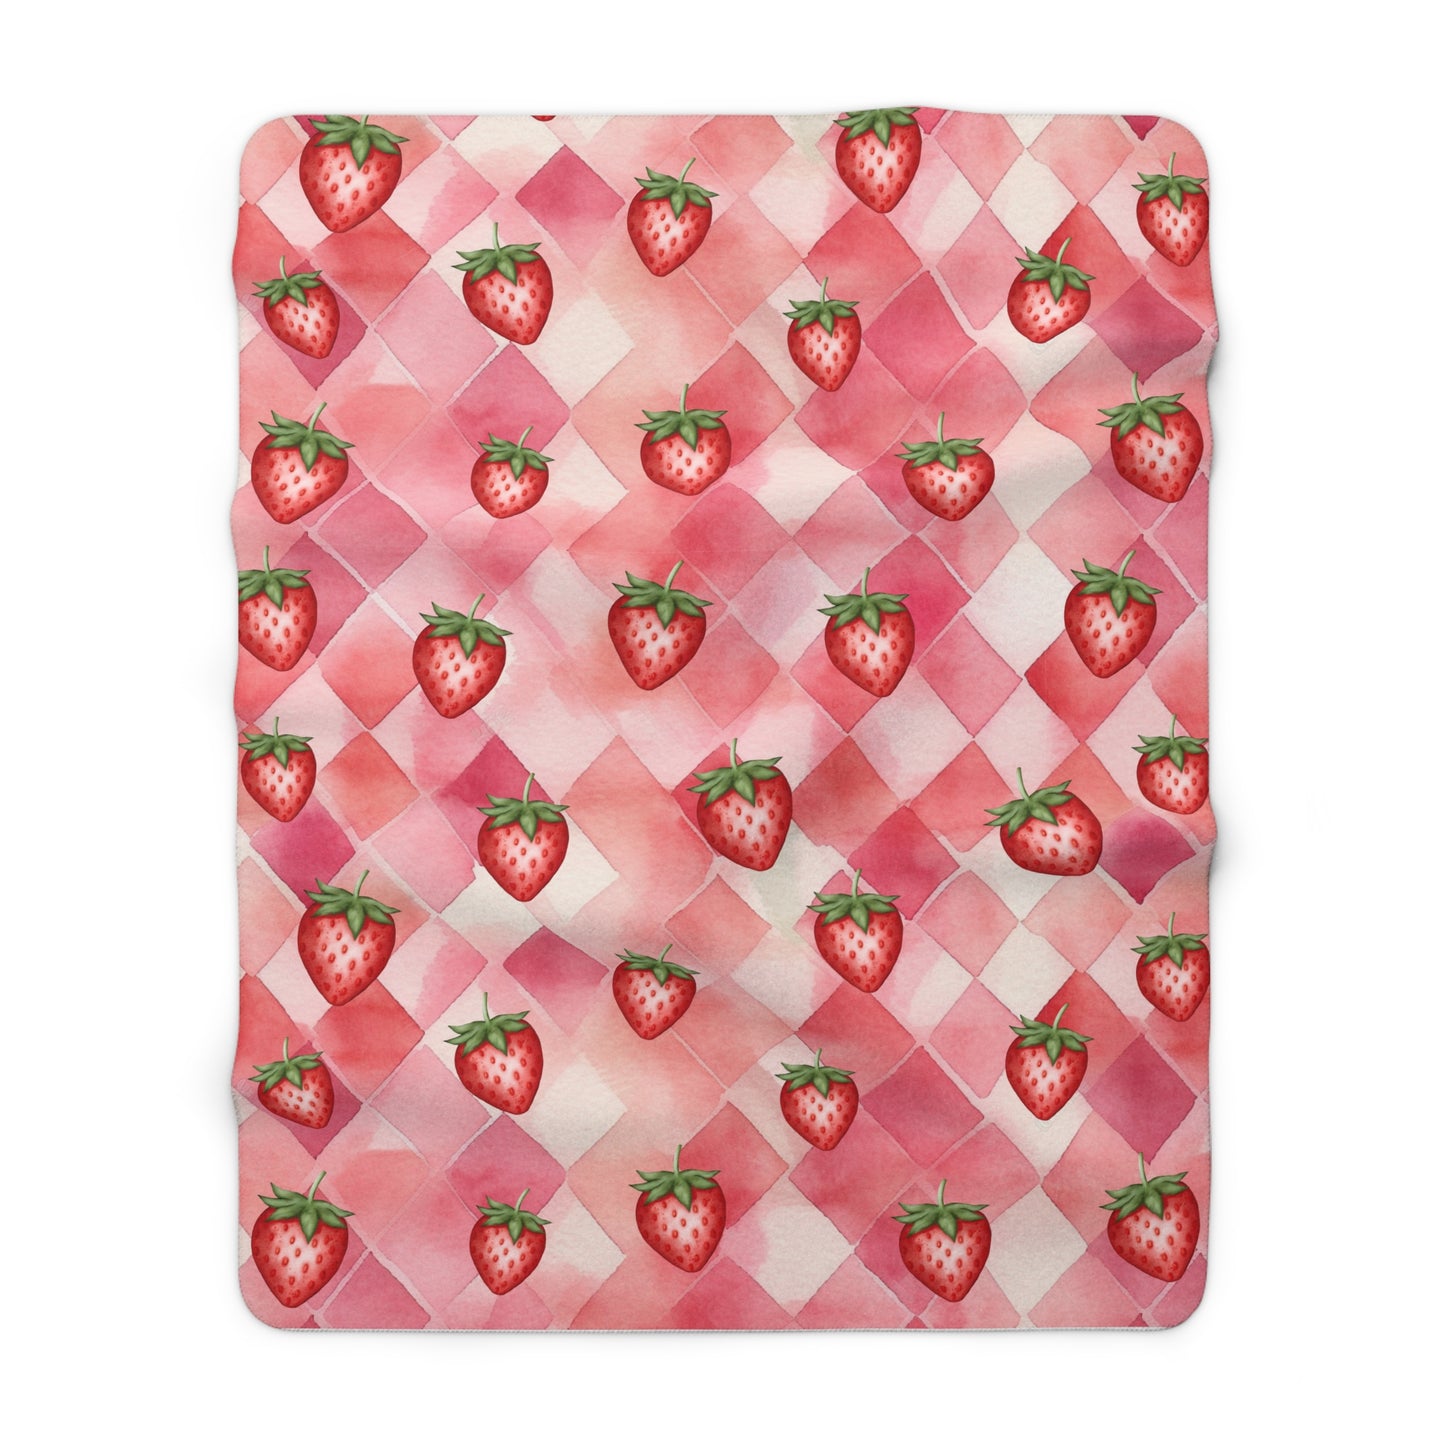 red and pink strawberry blanket on a checkered background perfect as a picnic blanket